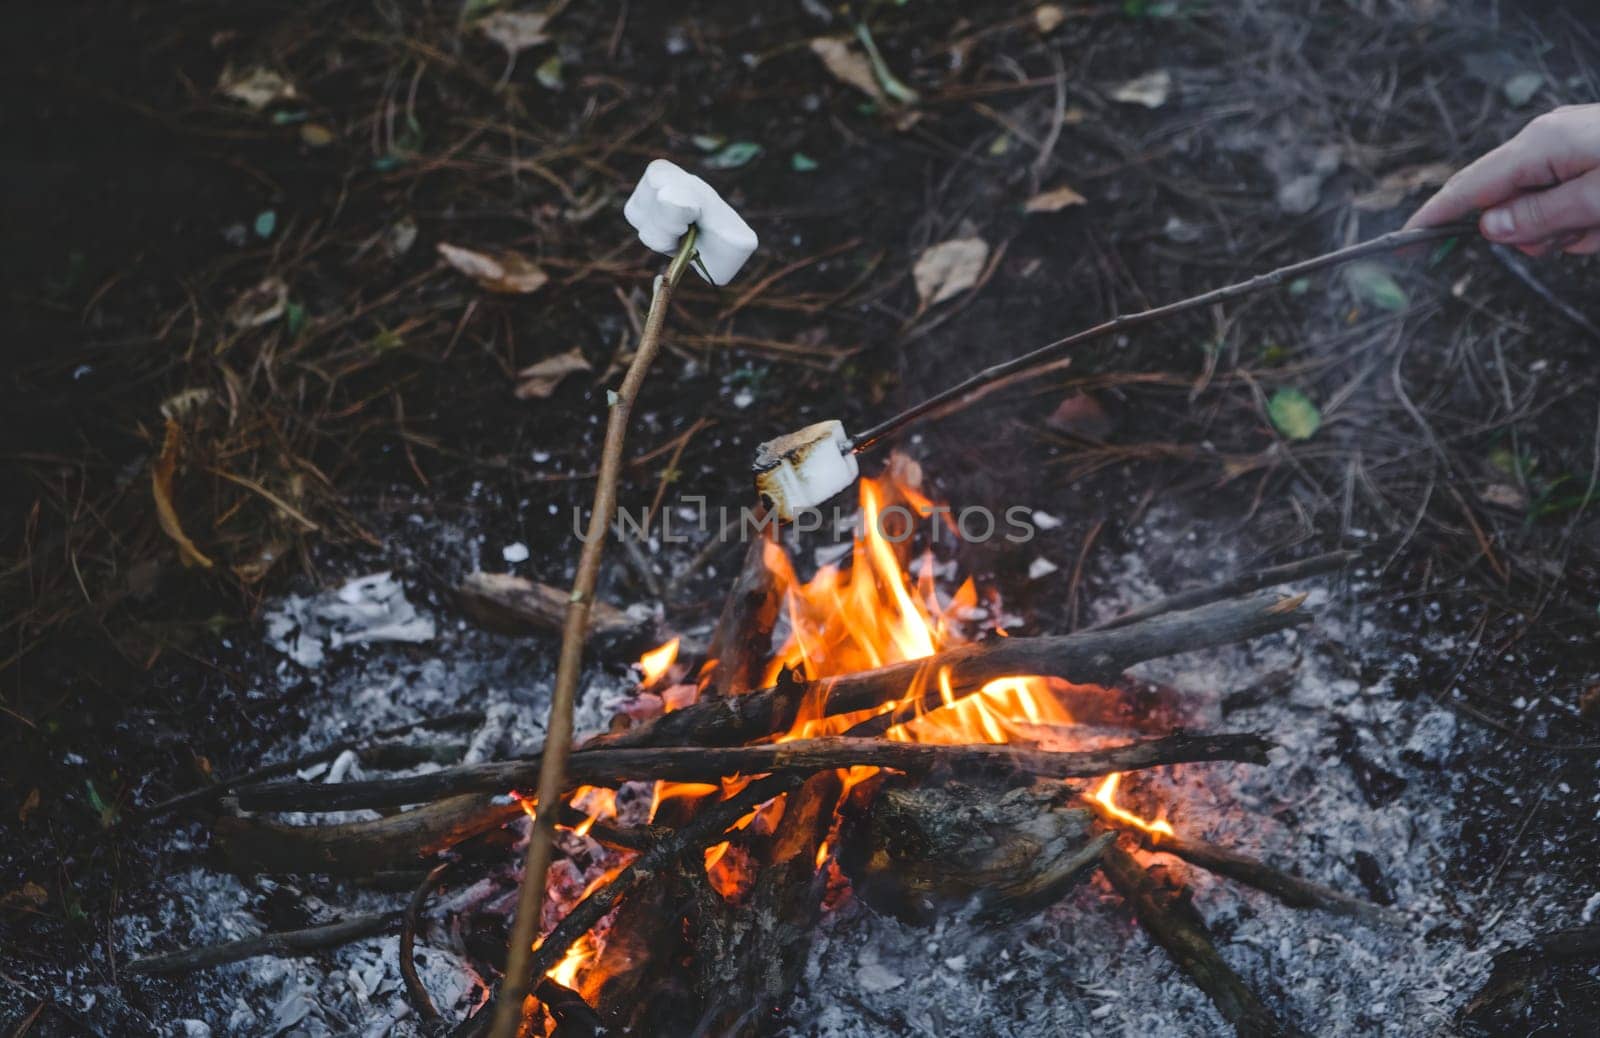 Marshmallow roasting hand drawn. Marshmallows on skewers in night camping fire. Wood campfire background. download photo